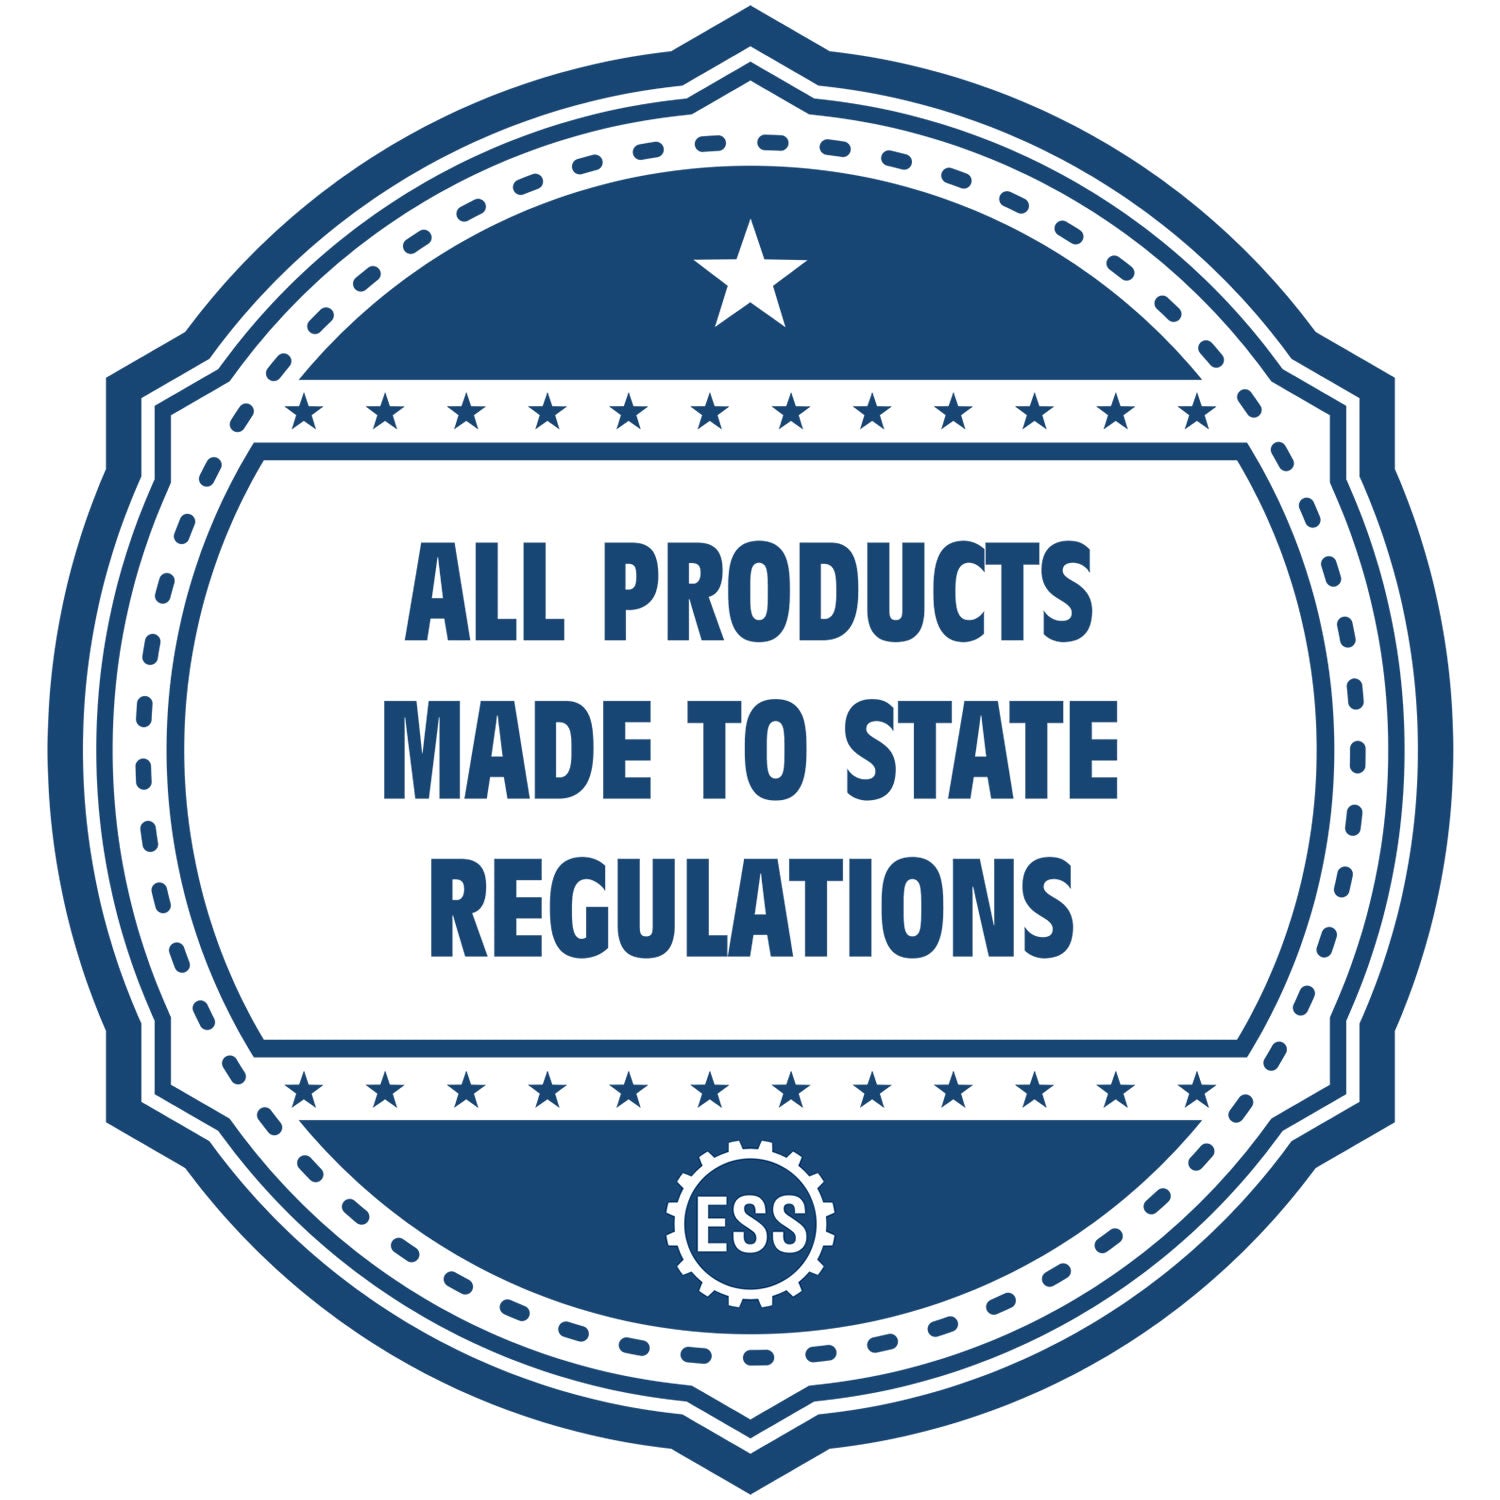 An icon or badge element for the Slim Pre-Inked Virginia Architect Seal Stamp showing that this product is made in compliance with state regulations.